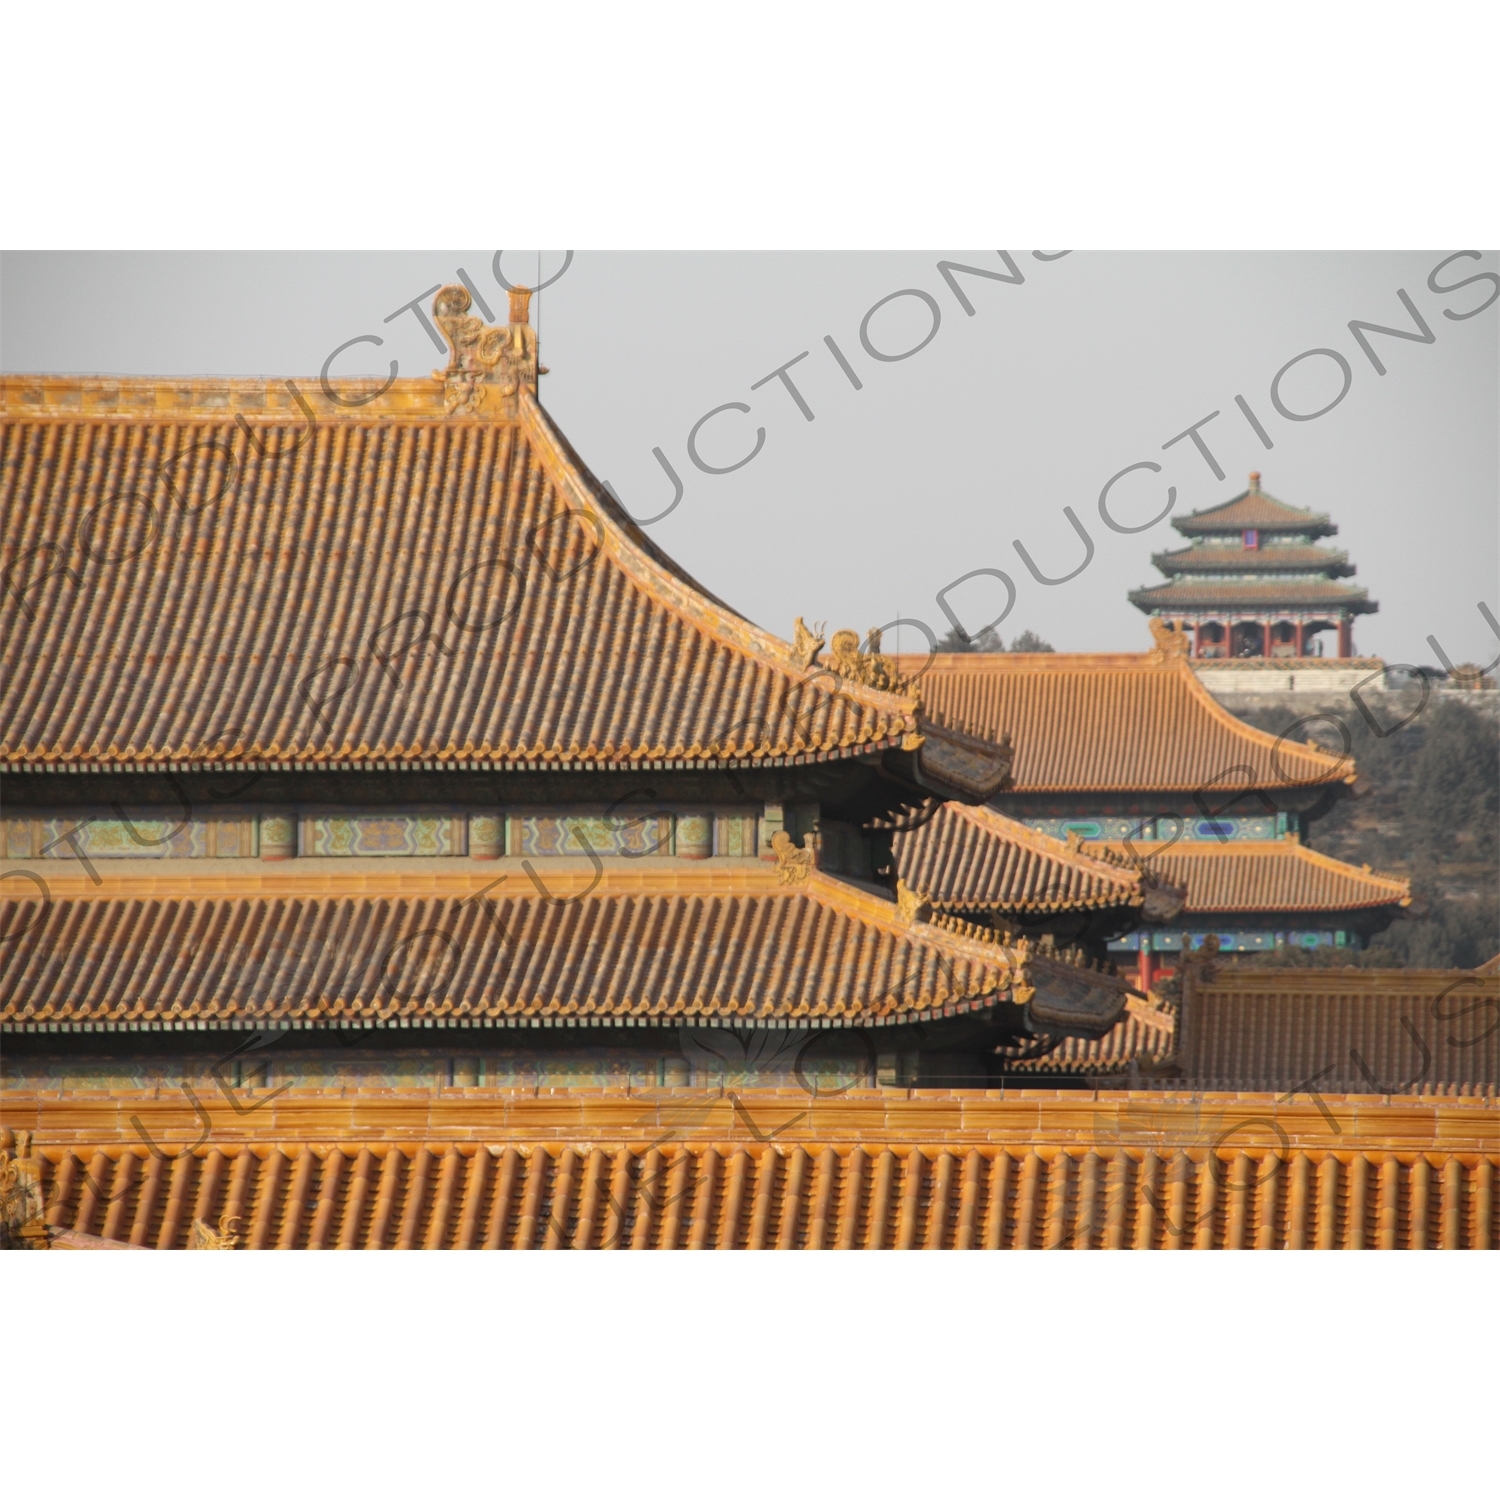 Forbidden City Roofs/Rooves and Wanchun Pavilion/Pavilion of Everlasting Spring/Pavilion of 10,000 Springs (Wanchun Ting) in Jingshan Park in Beijing